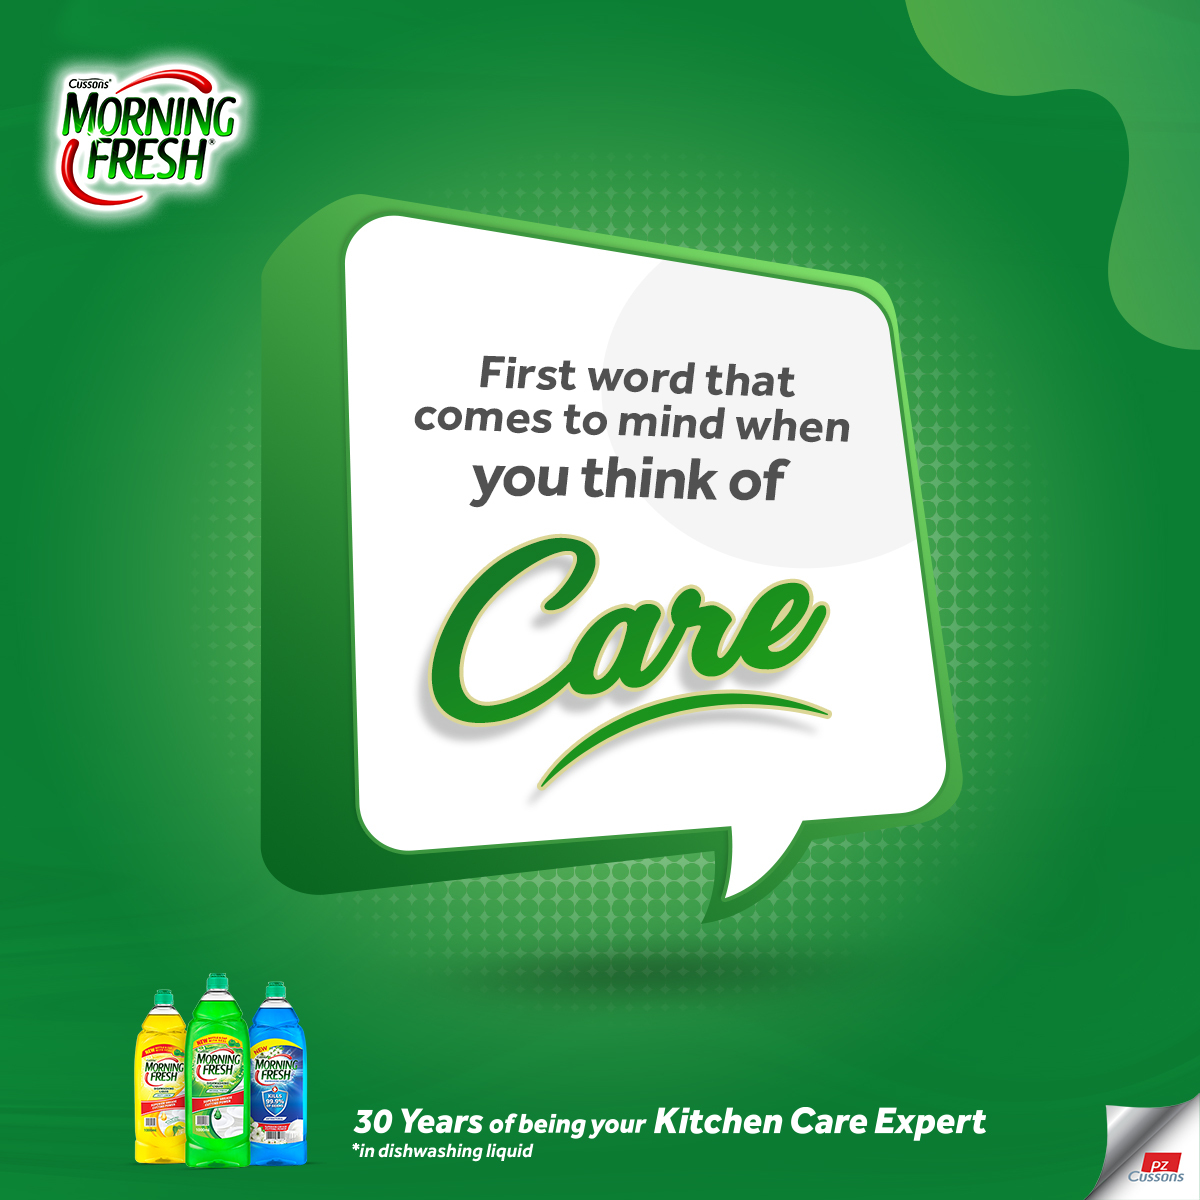 The beauty of care is that everyone experiences and expresses care in their own way. Share with us that one word that comes to mind when you think about care?

#CaringForTheCaregiver #MorningFresh